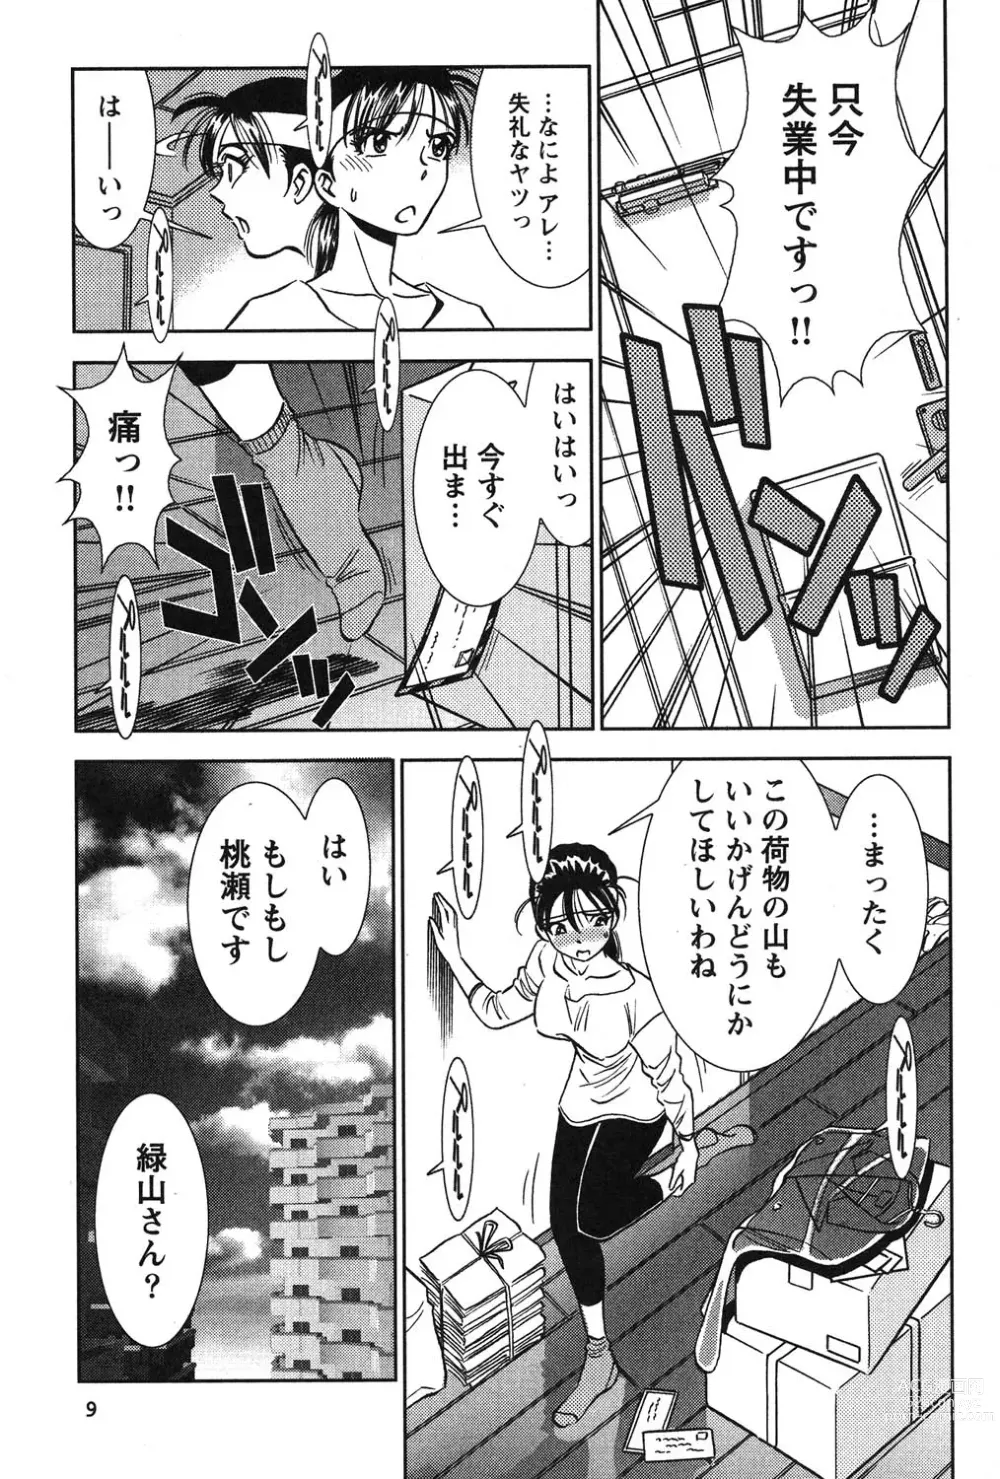 Page 10 of manga Melty Moon Kogetsu Hen - A woman falls in the evening of the moonlight night.